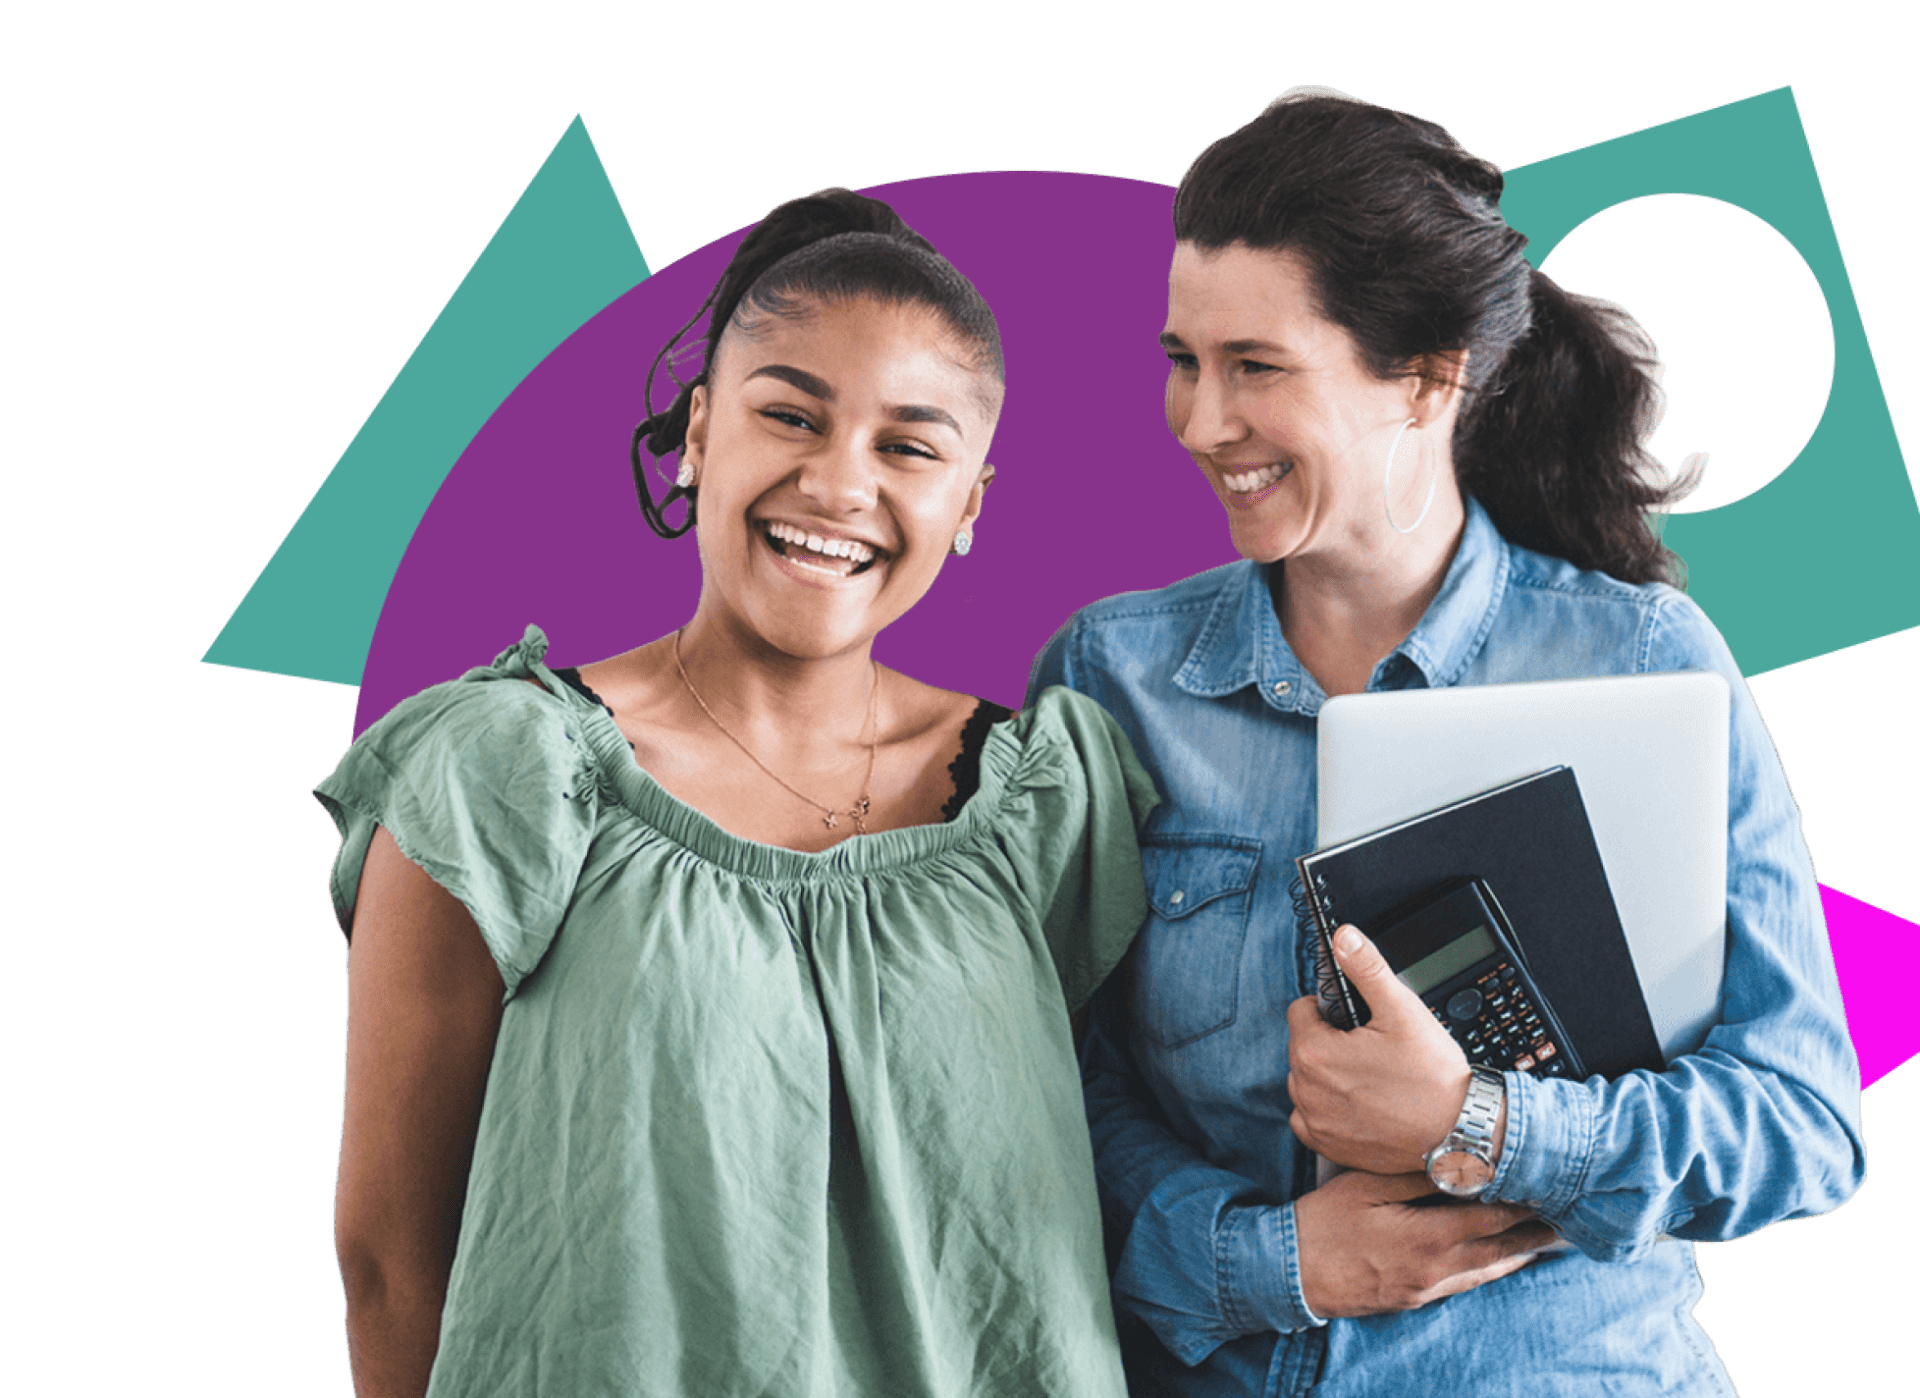 Welcome to the Accounting Careers scholarship by Accounting Plus